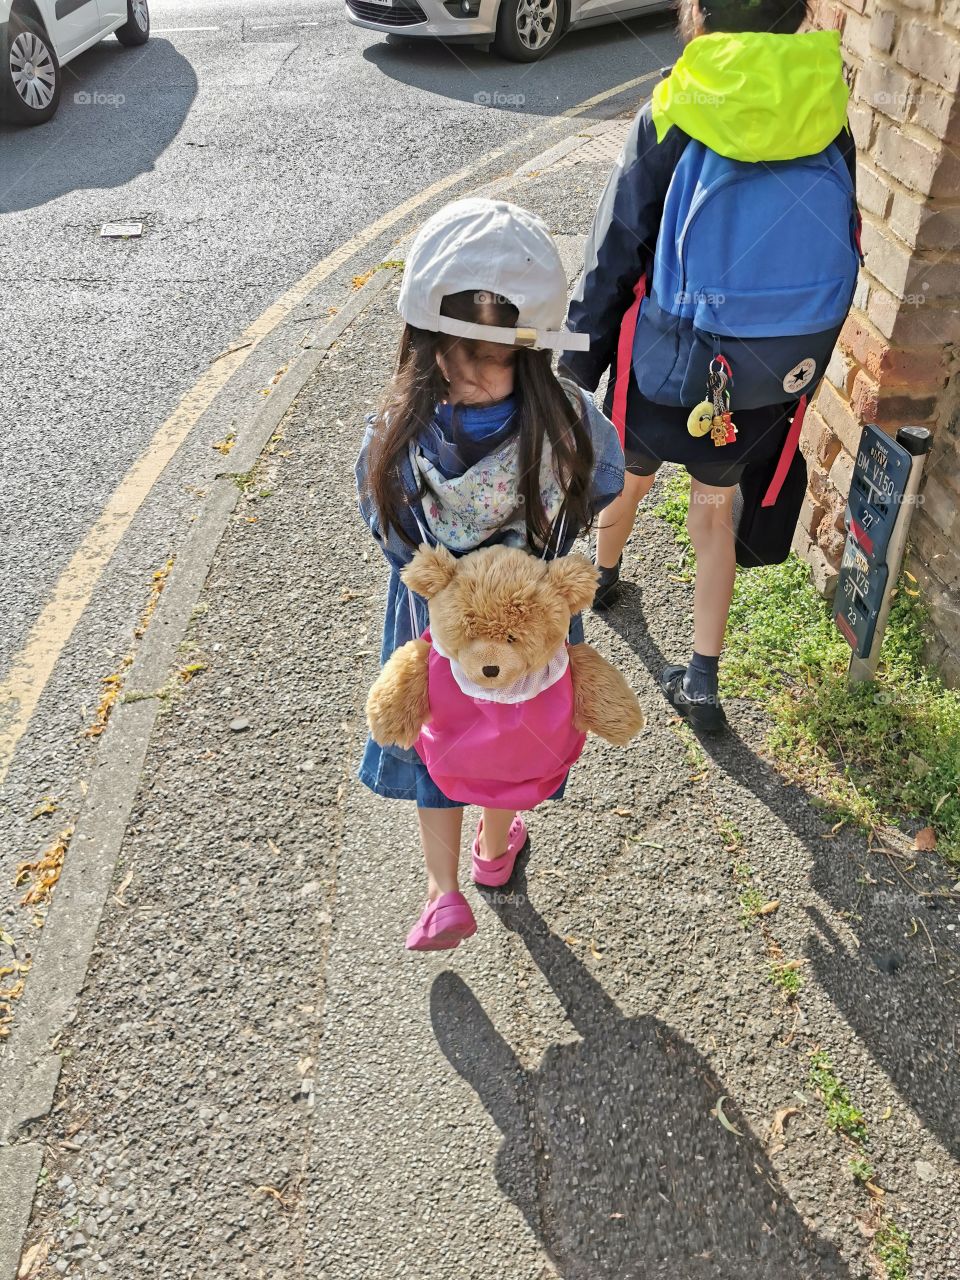 Boy and girl walking in the street with Teddy on the girls back and backpack on boy.